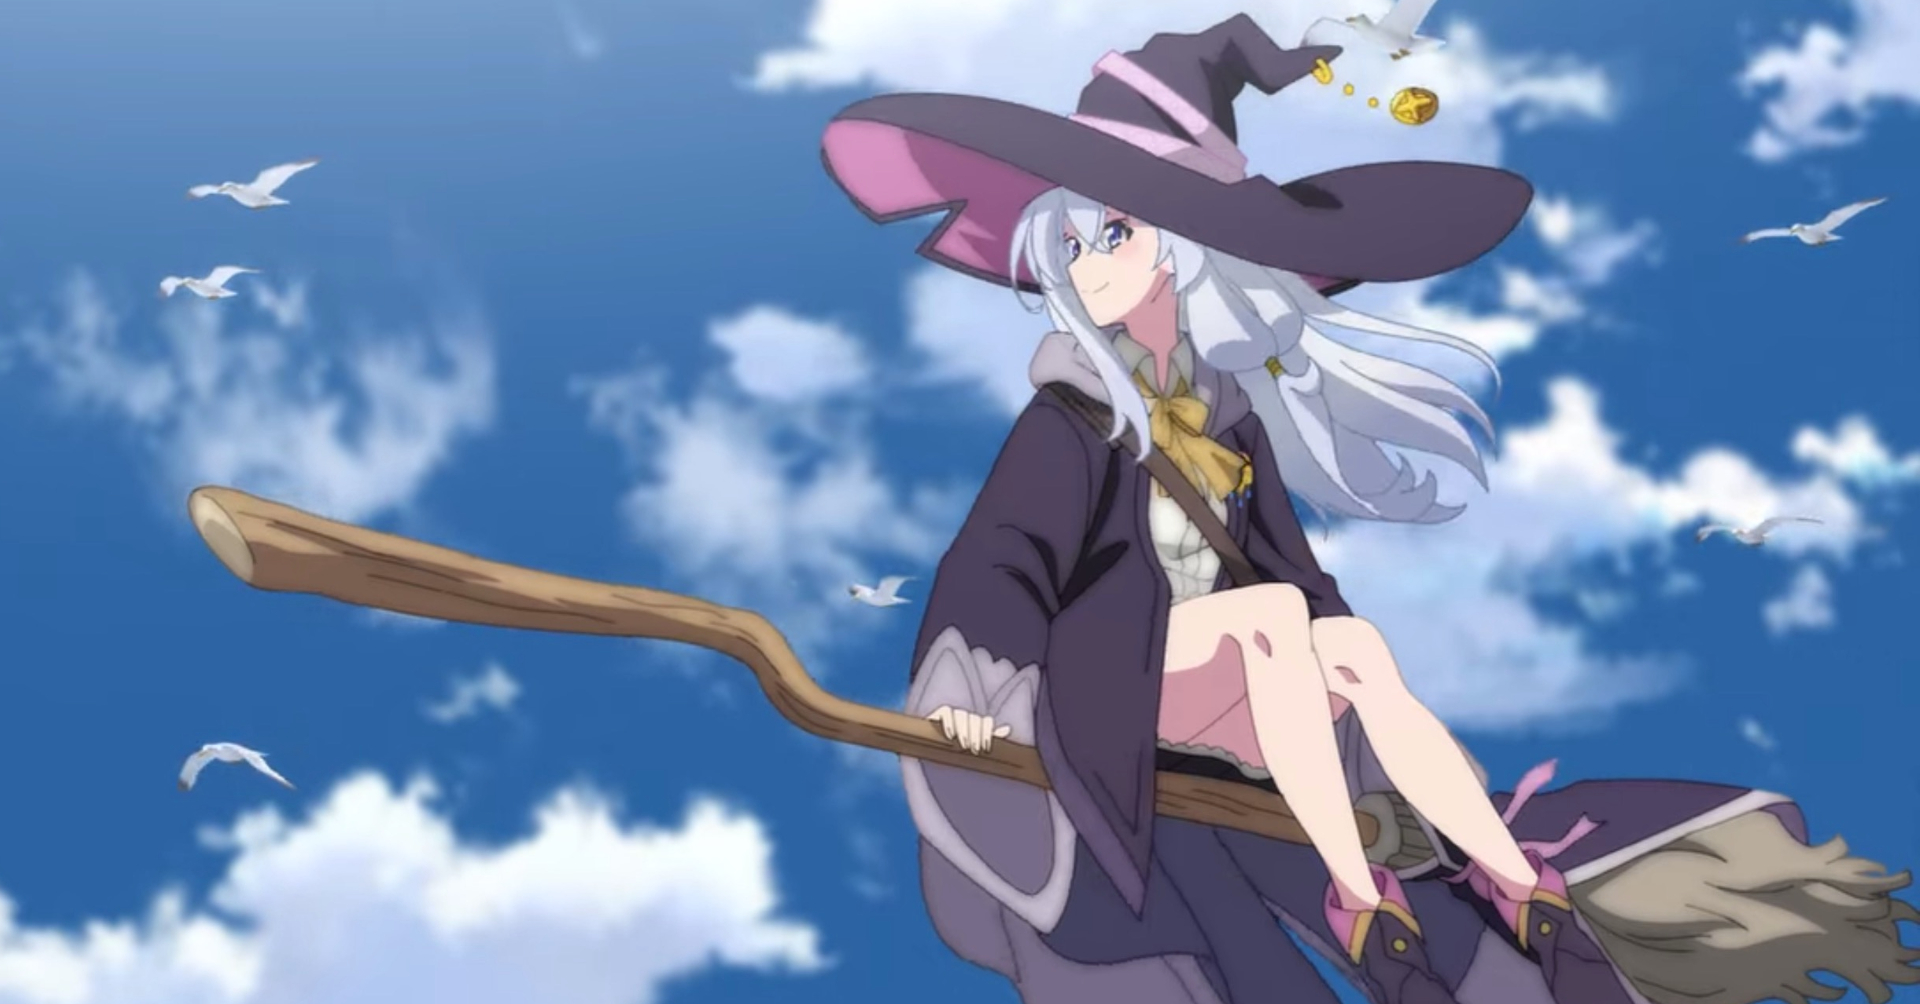 4202 Anime Witch Images Stock Photos  Vectors  Shutterstock